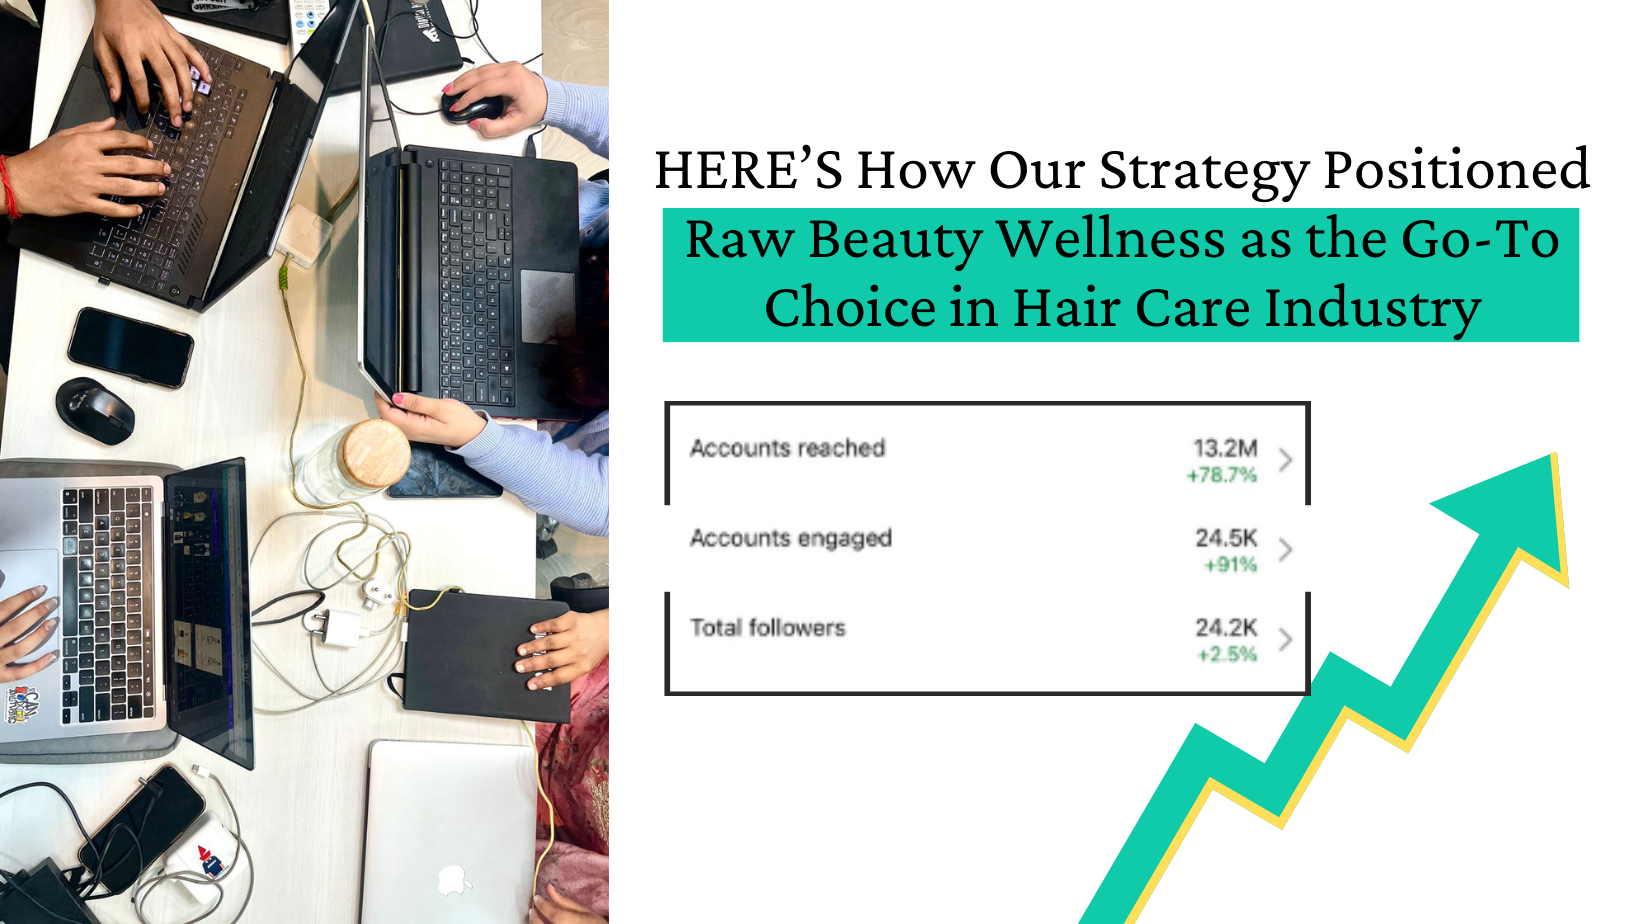 How Our Strategy Positioned Raw Beauty Wellness as the Go-To Choice in Hair Care Industry